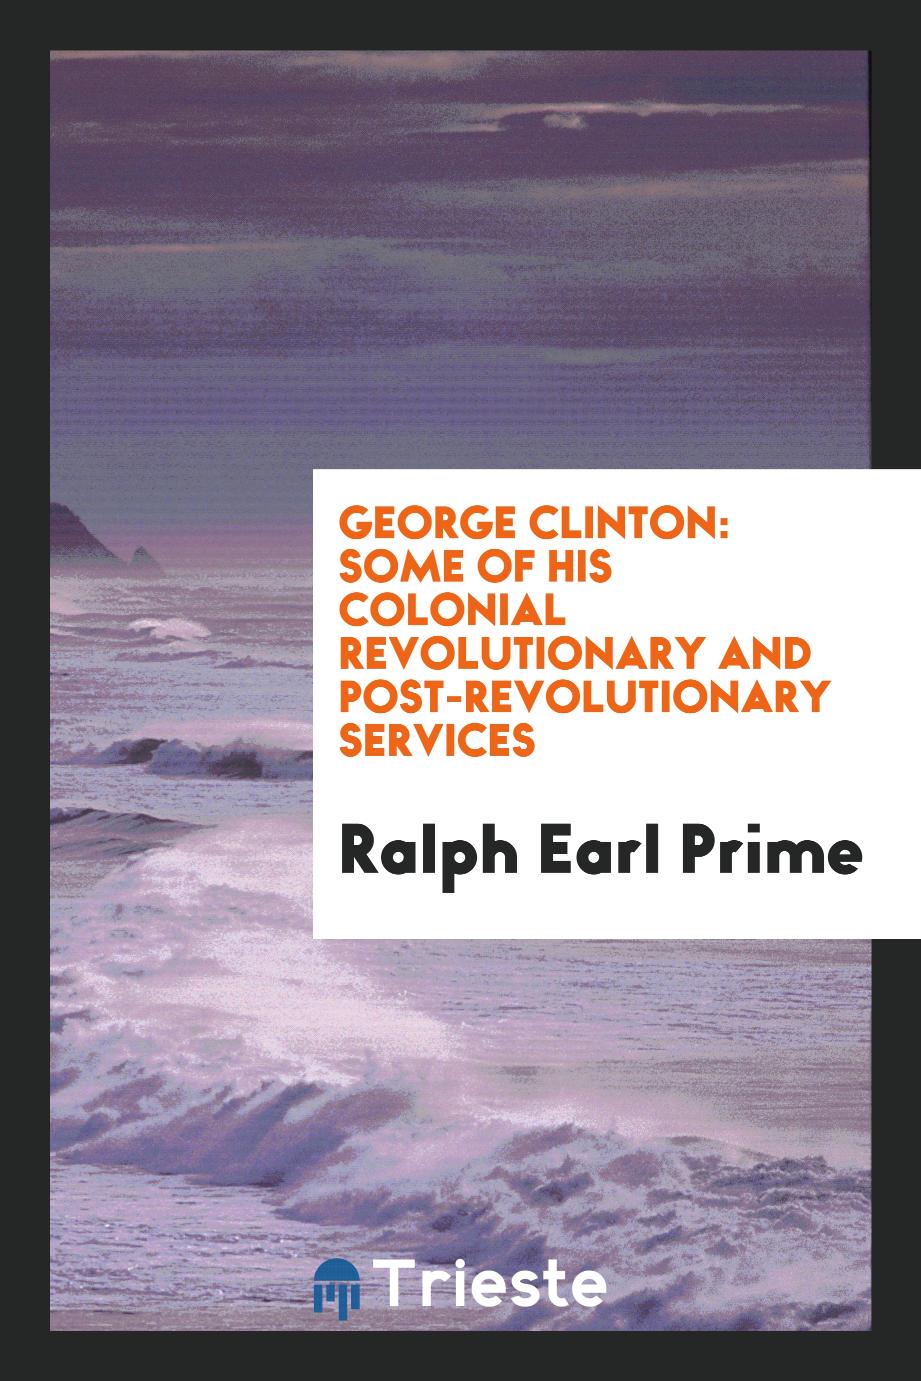 George Clinton: Some of His Colonial Revolutionary and Post-revolutionary Services